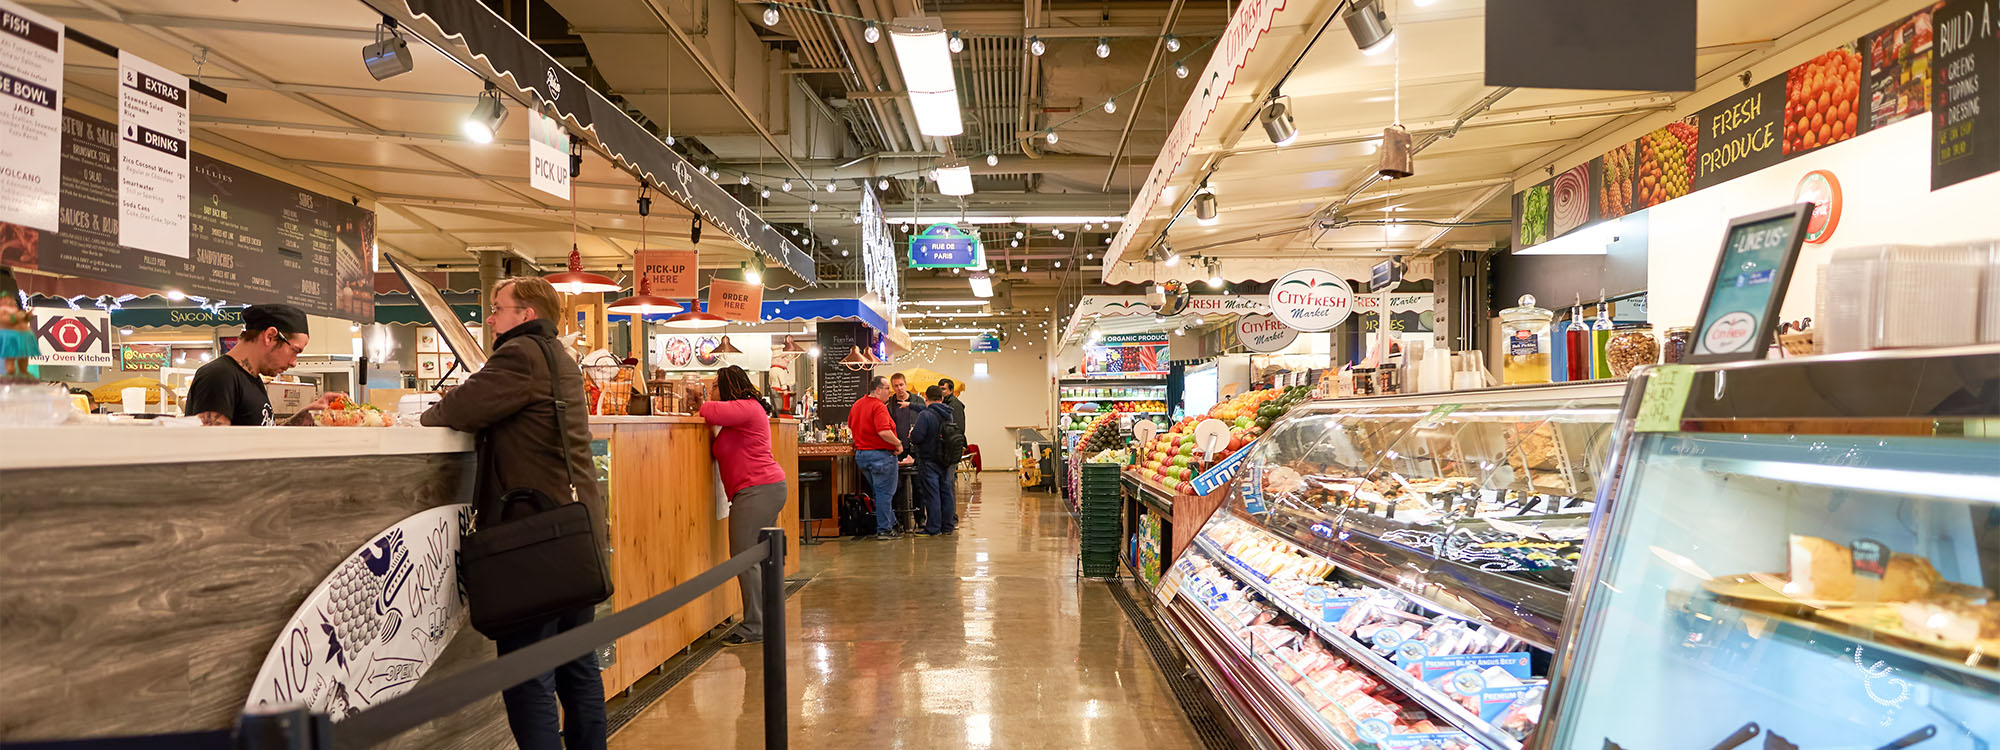 Where to Find Food Halls and Markets in Chicago neighborhoods com